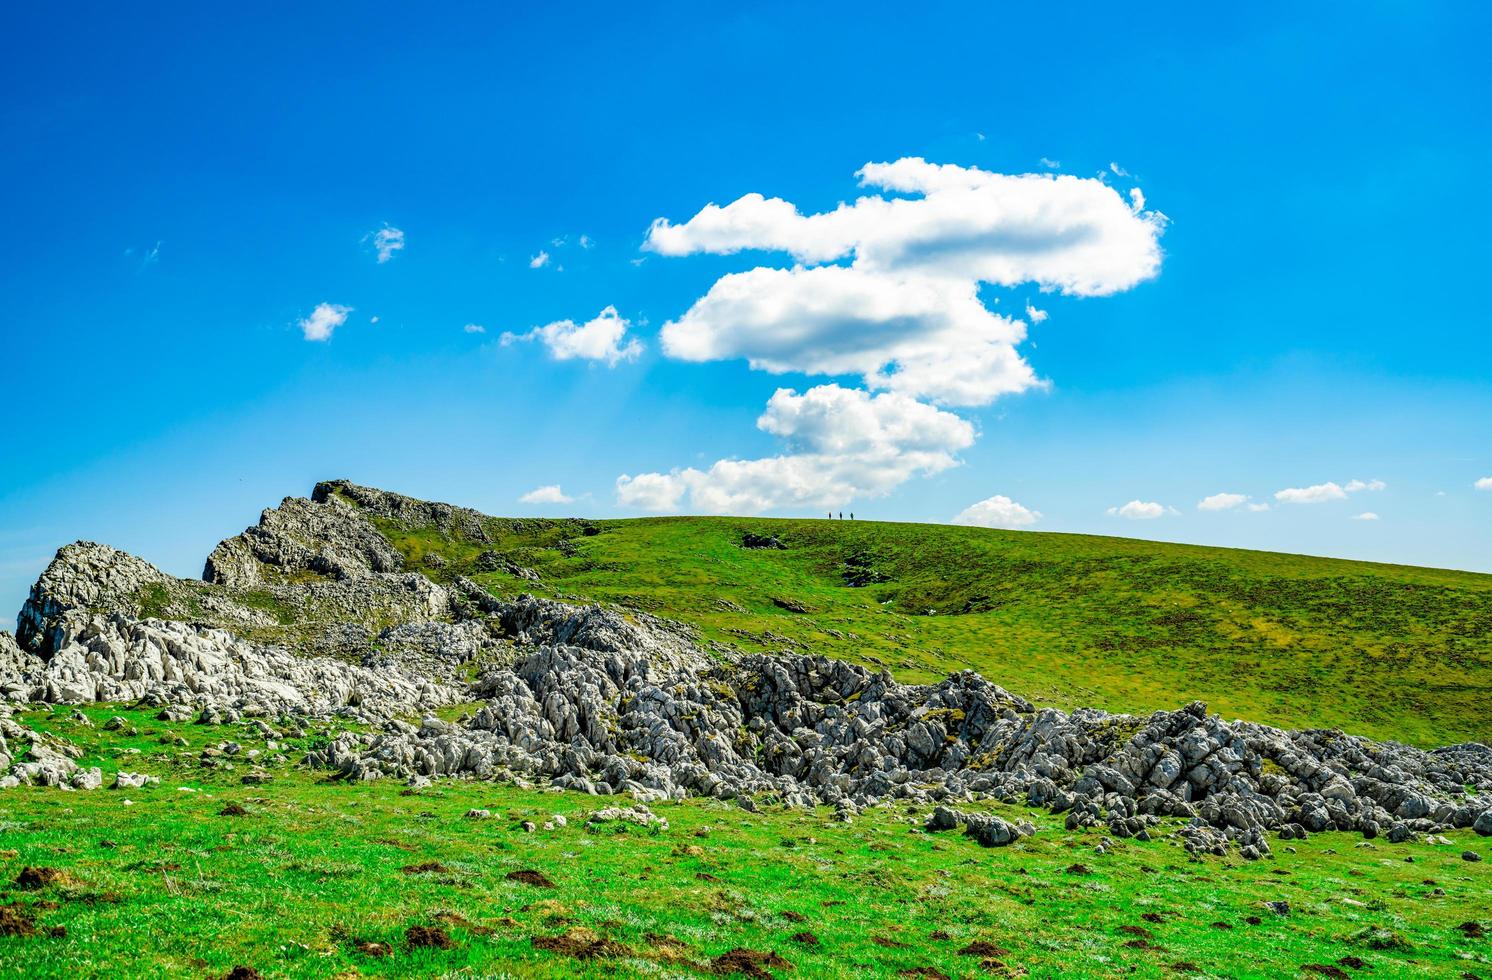 Landscape of green grass and rock hill in spring with beautiful blue sky and white clouds. Countryside or rural view. Nature background in sunny day. Fresh air environment. Stone on the mountain. photo